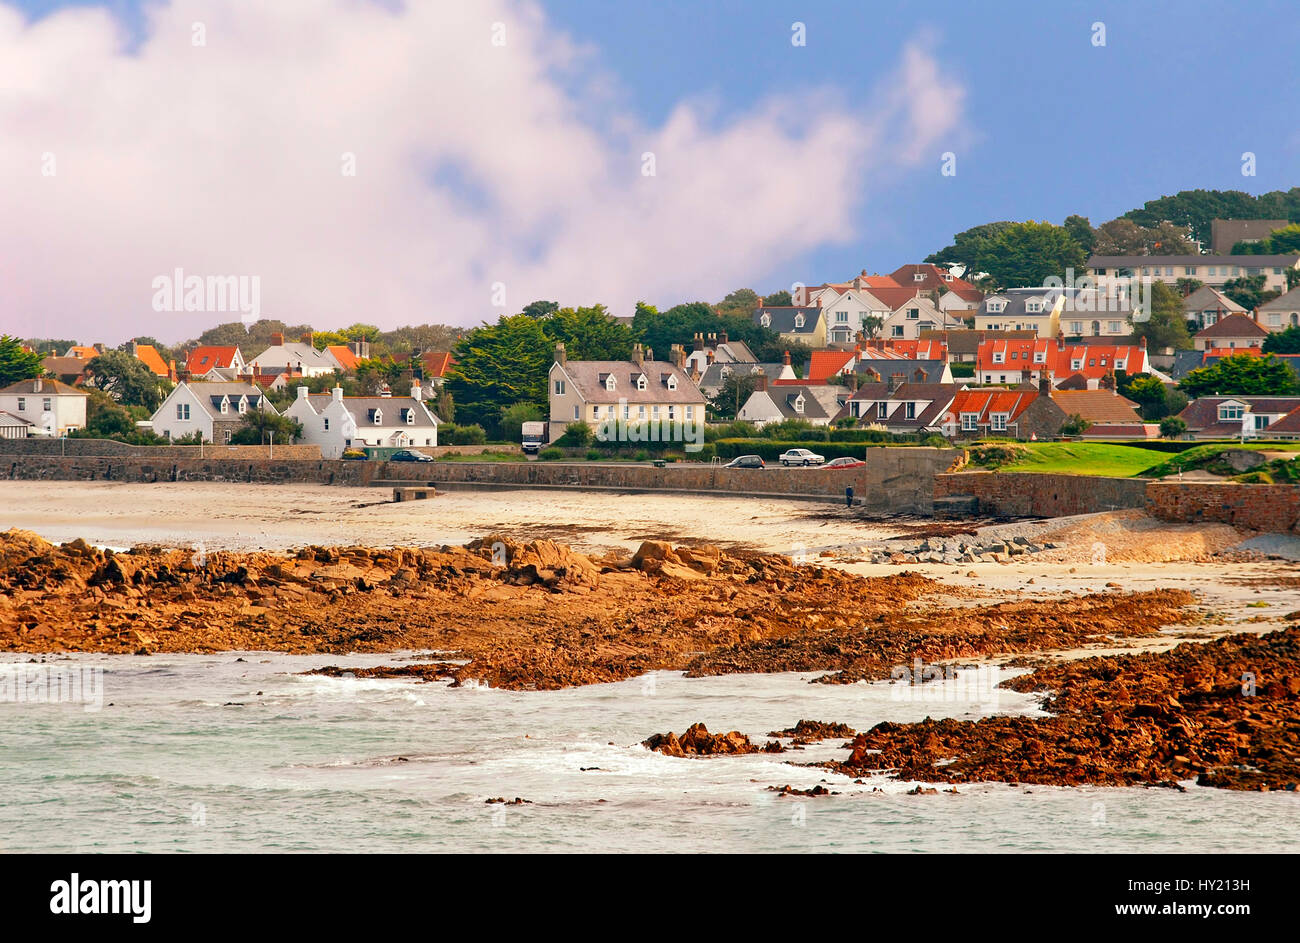 Landscape Image of the village Perelle on the North Coast of Guernsey, Channel Islands. Stock Photo